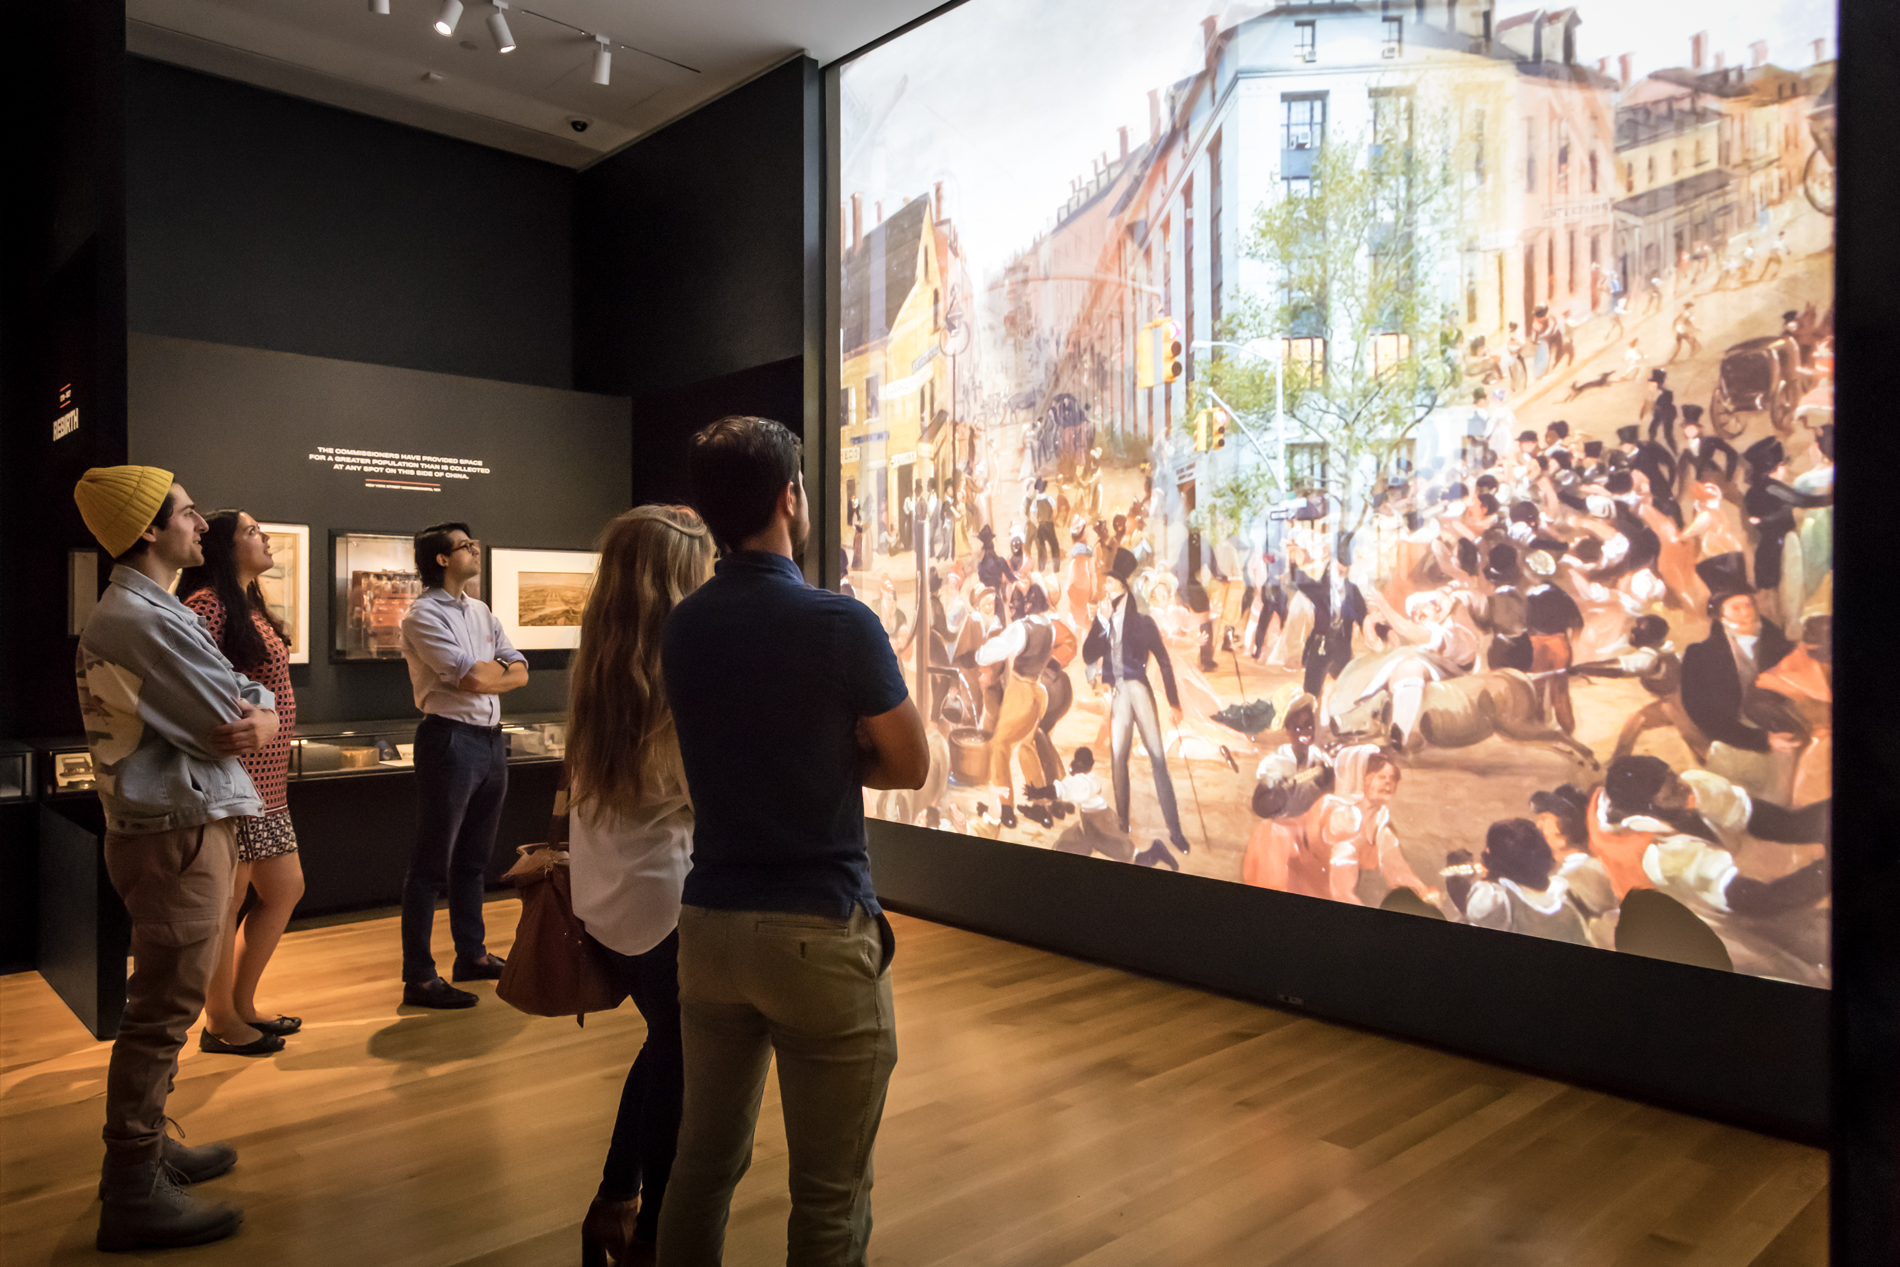 Visitors look at a large projection in an exhibition space